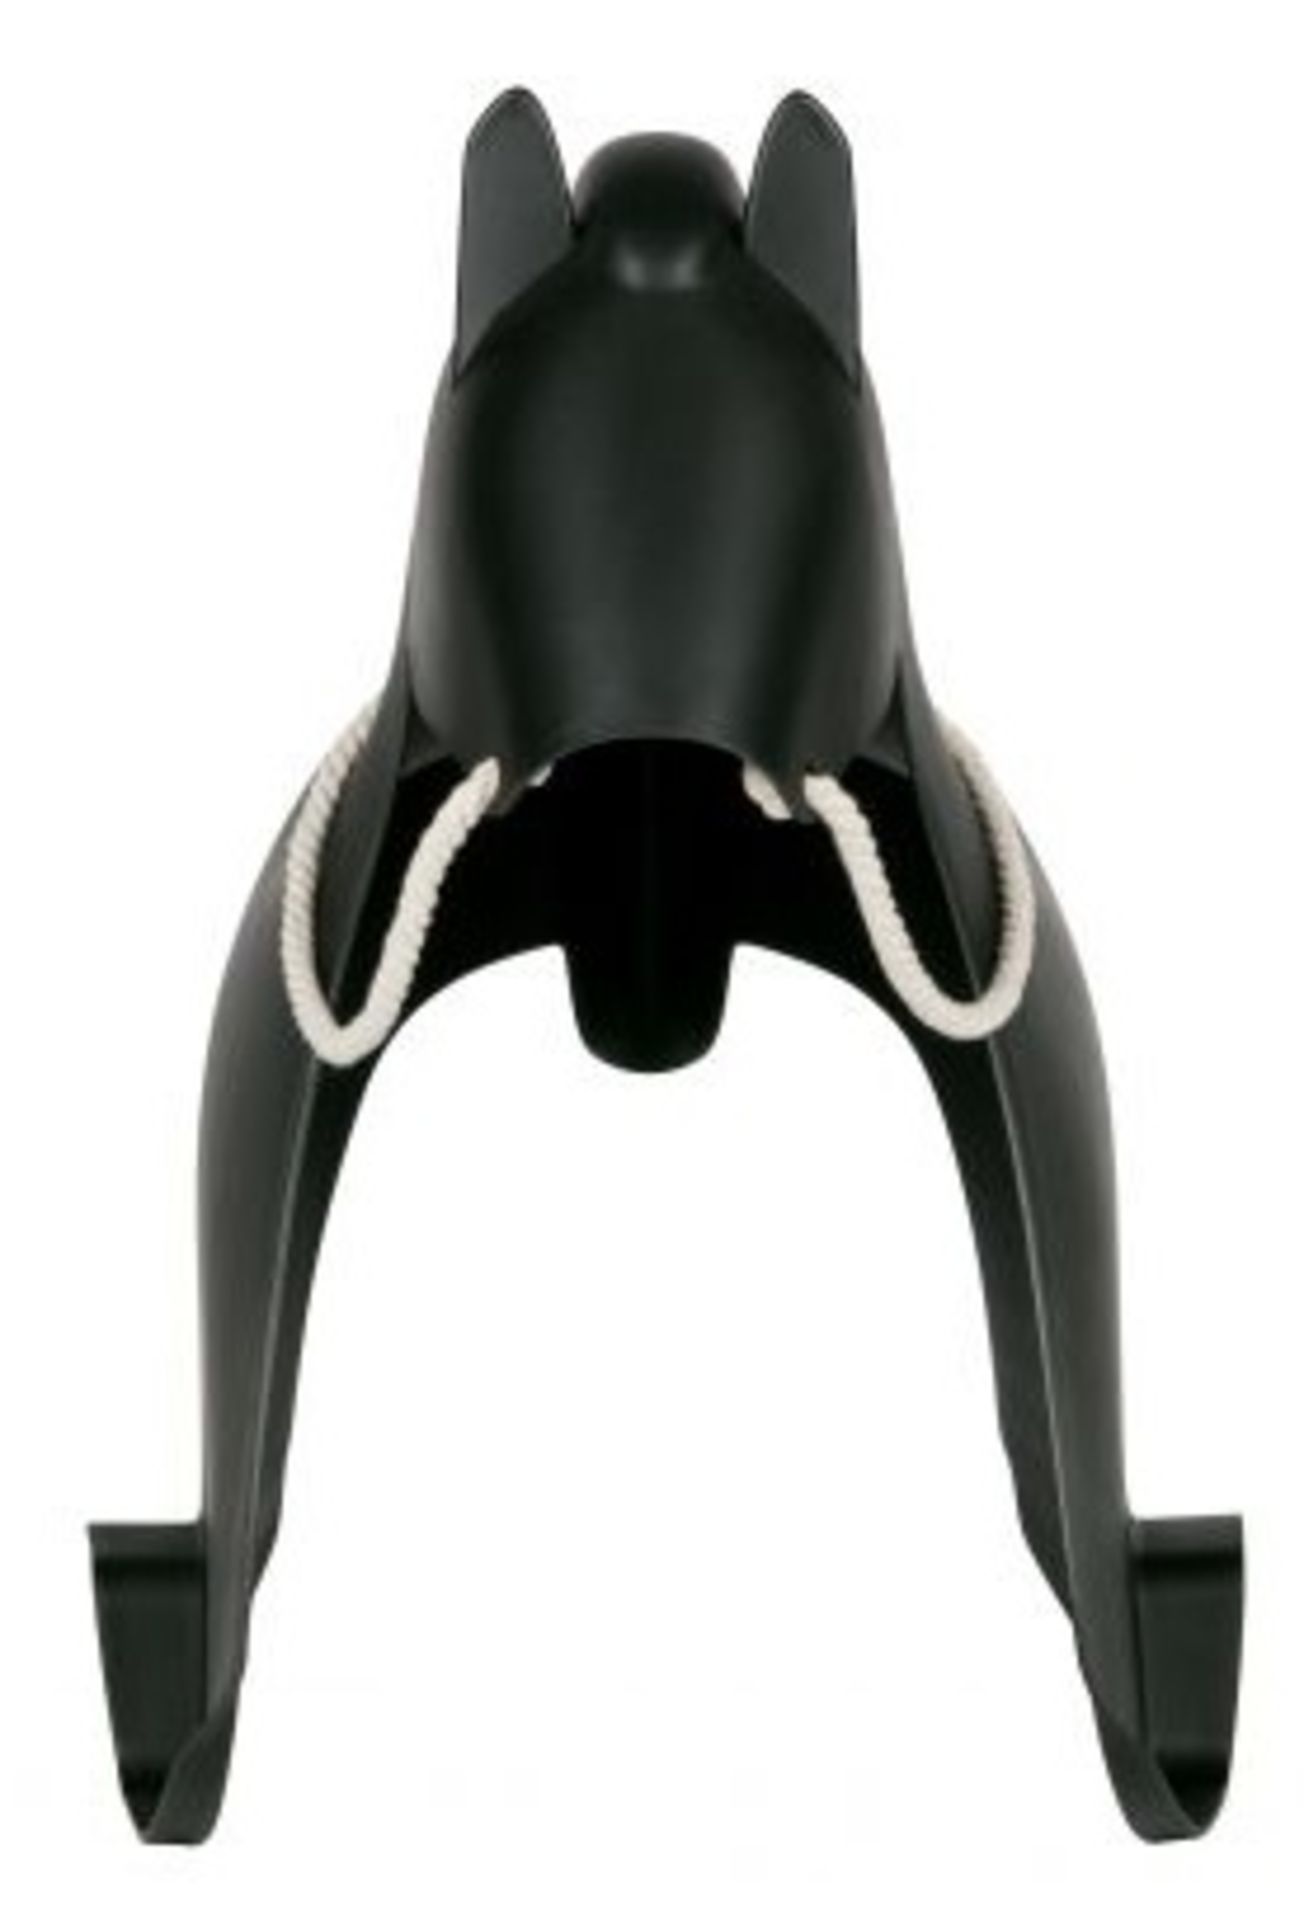 1 x MEIA Contemporary Rocking Horse In Black - Dimensions: H61xW80xD41cm - Brand New Stock - Image 4 of 5